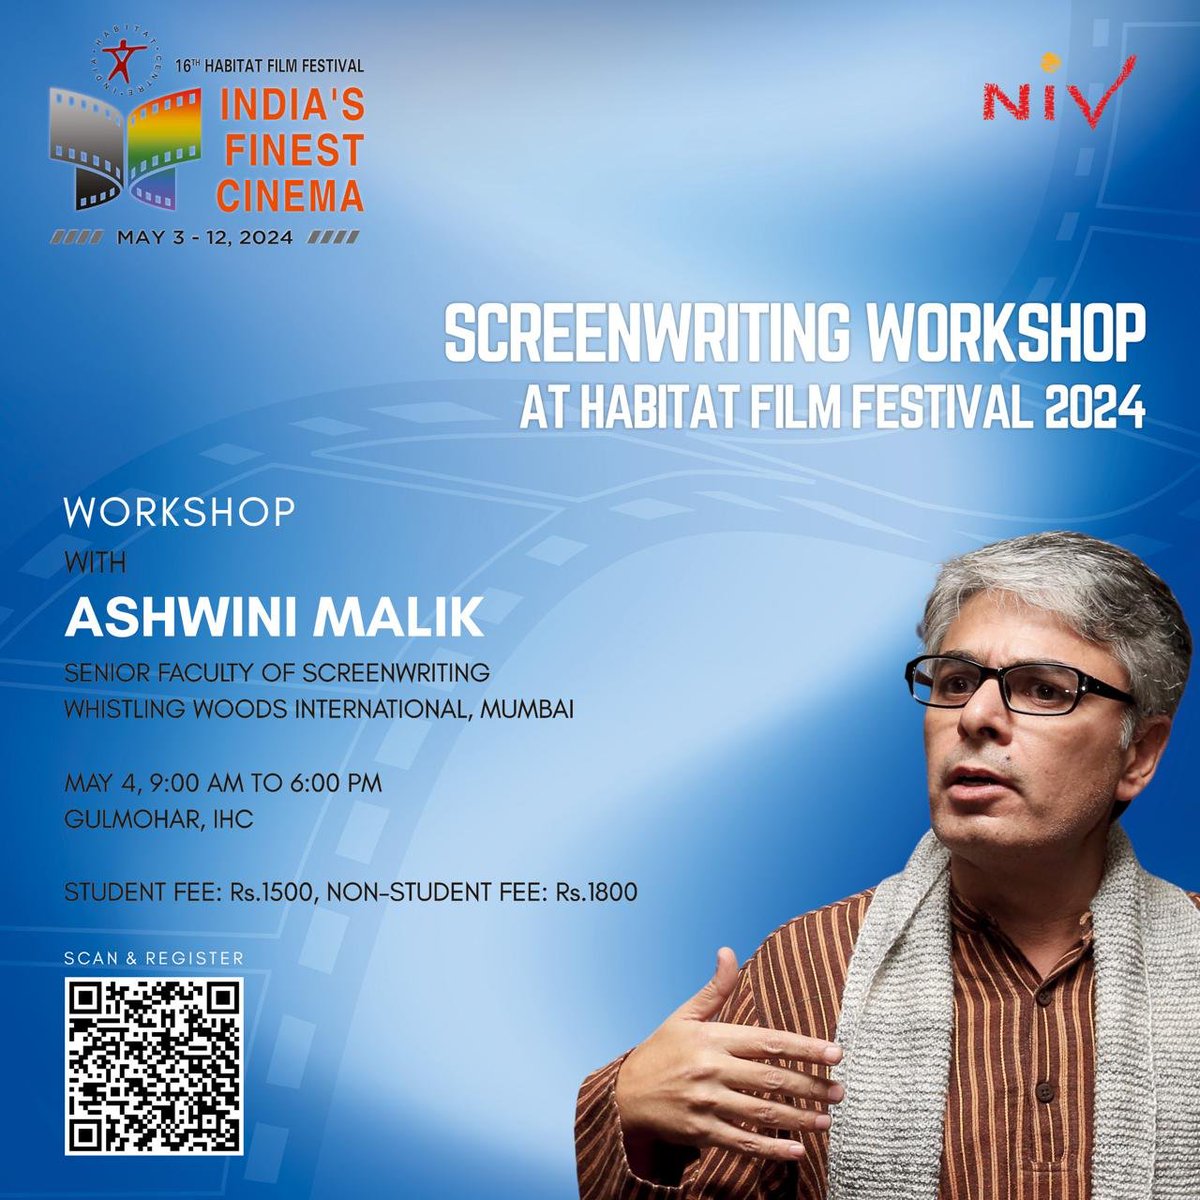 Learn the craft of Screenwriting at an exclusive Screenwriting Workshop at HFF 2024! The participants can delve into the art of crafting compelling screenplays with noted screenwriting mentor Ashwini Malik at the workshop on May 4, Saturday, from 9 am to 6 pm, at Gulmohar, IHC.…